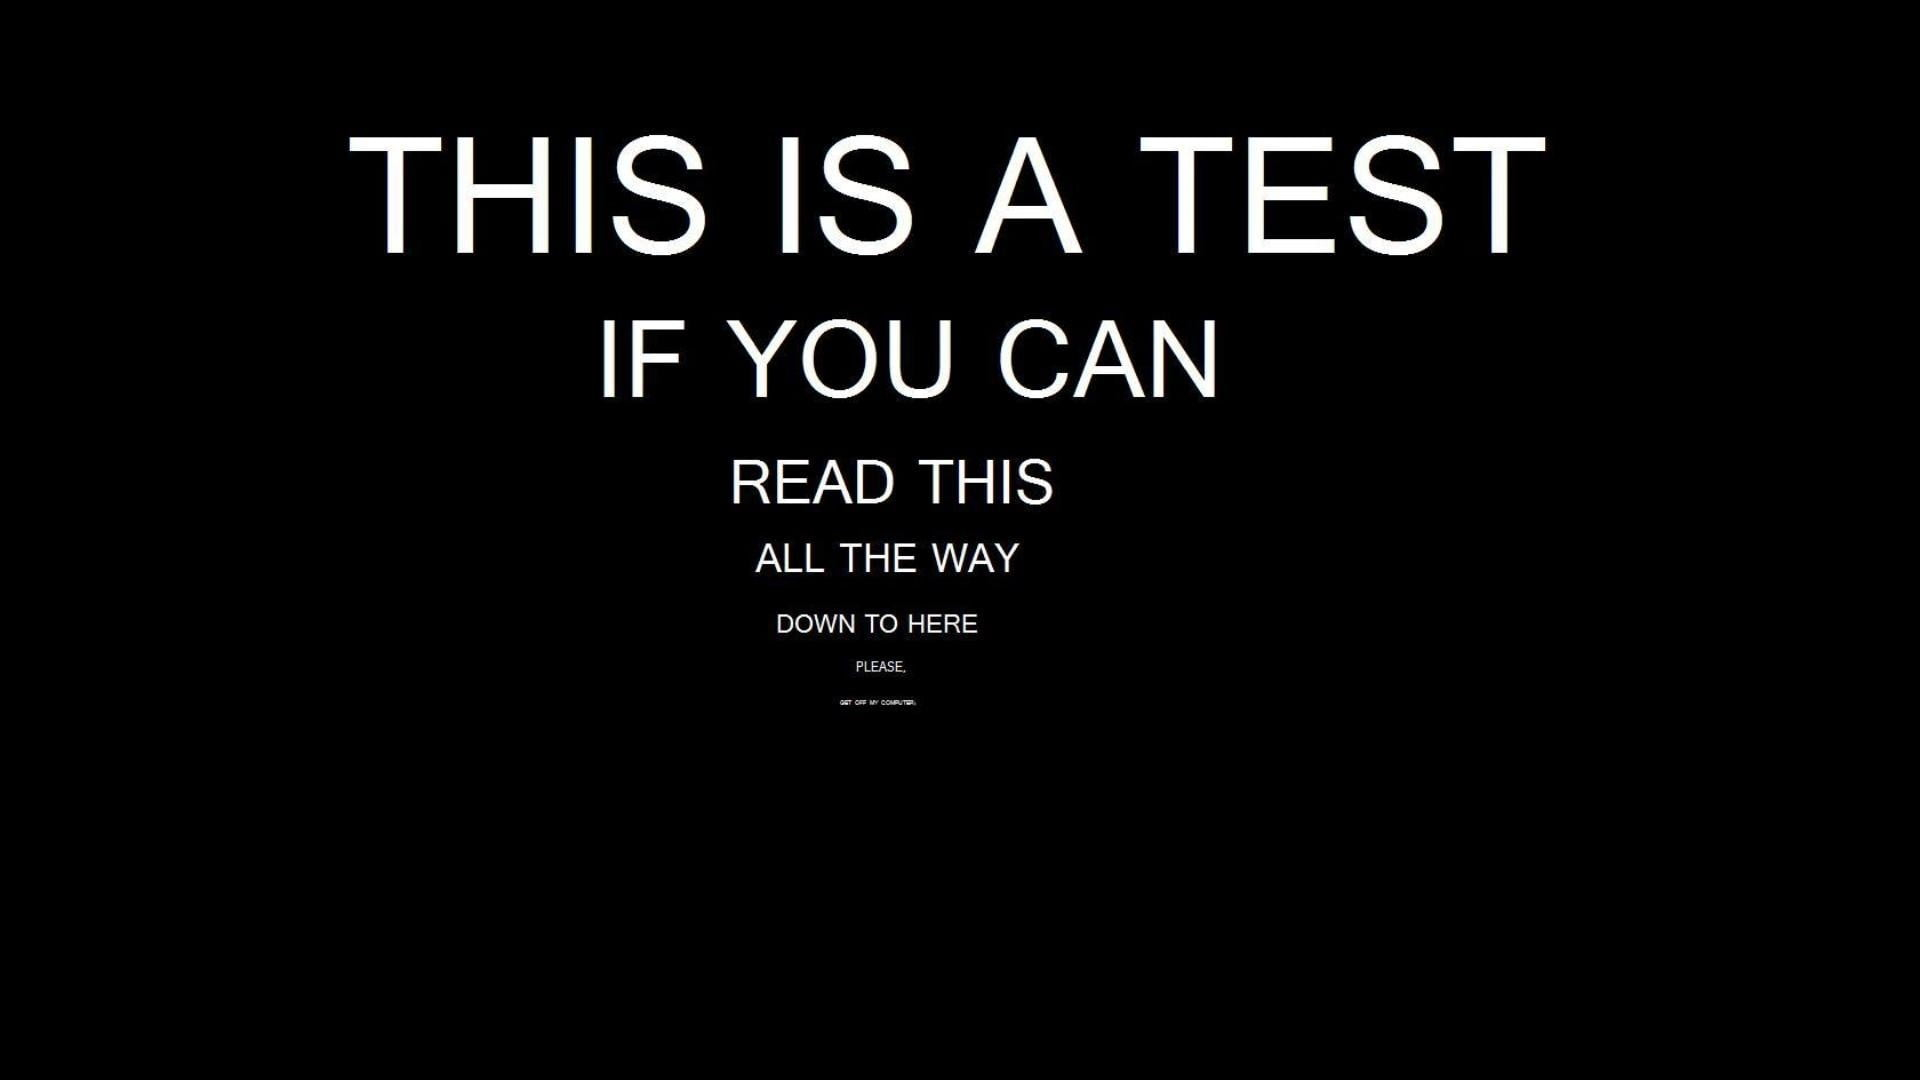 Wallpaper white eye test text, black background with text overlay, quote